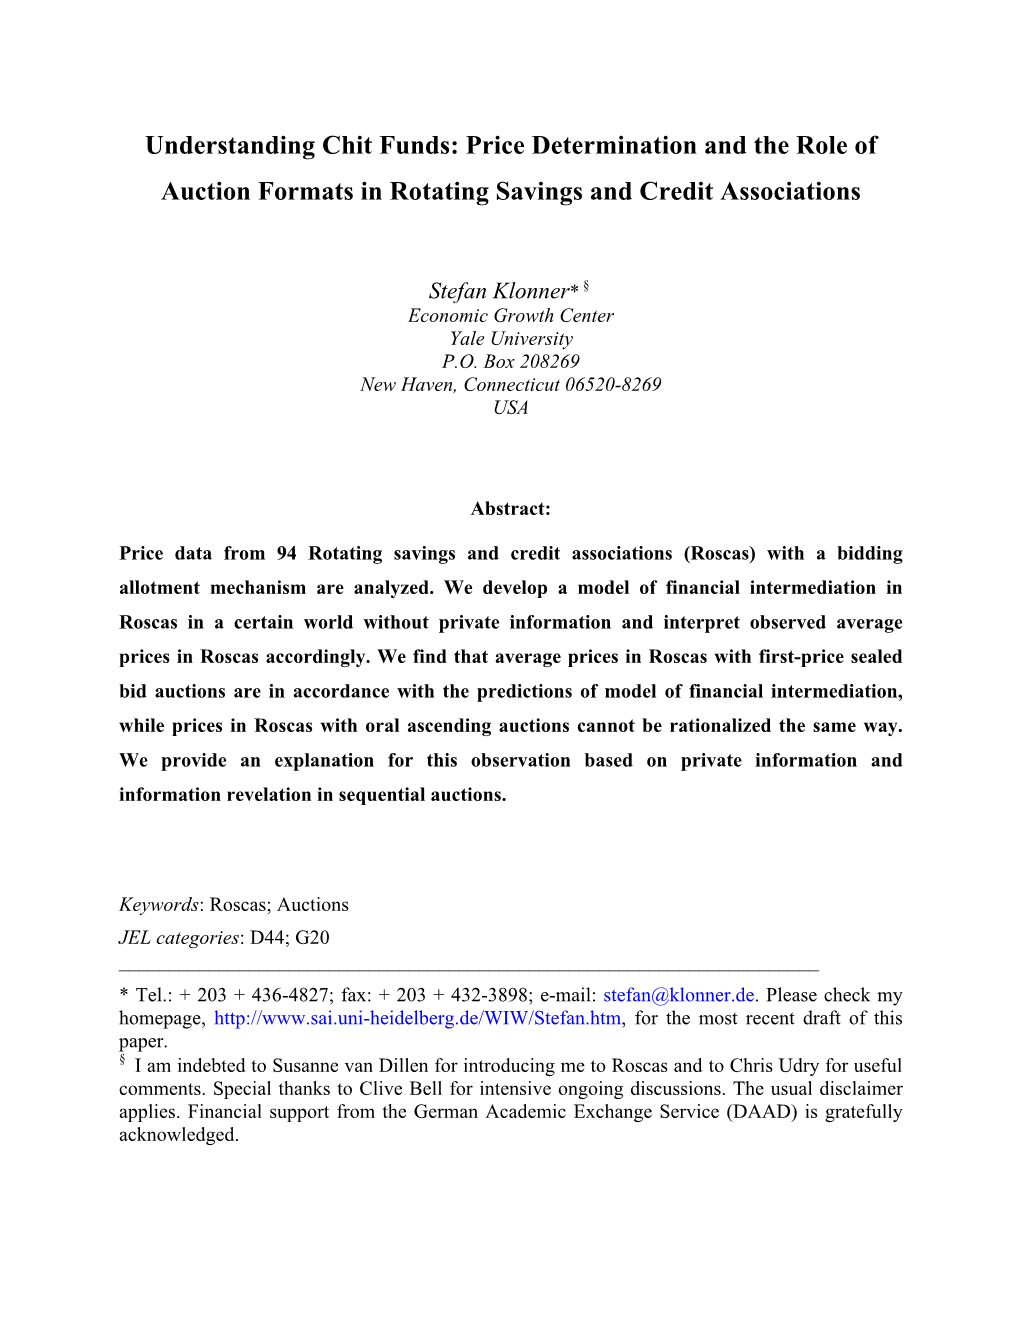 Understanding Chit Funds: Price Determination and the Role of Auction Formats in Rotating Savings and Credit Associations